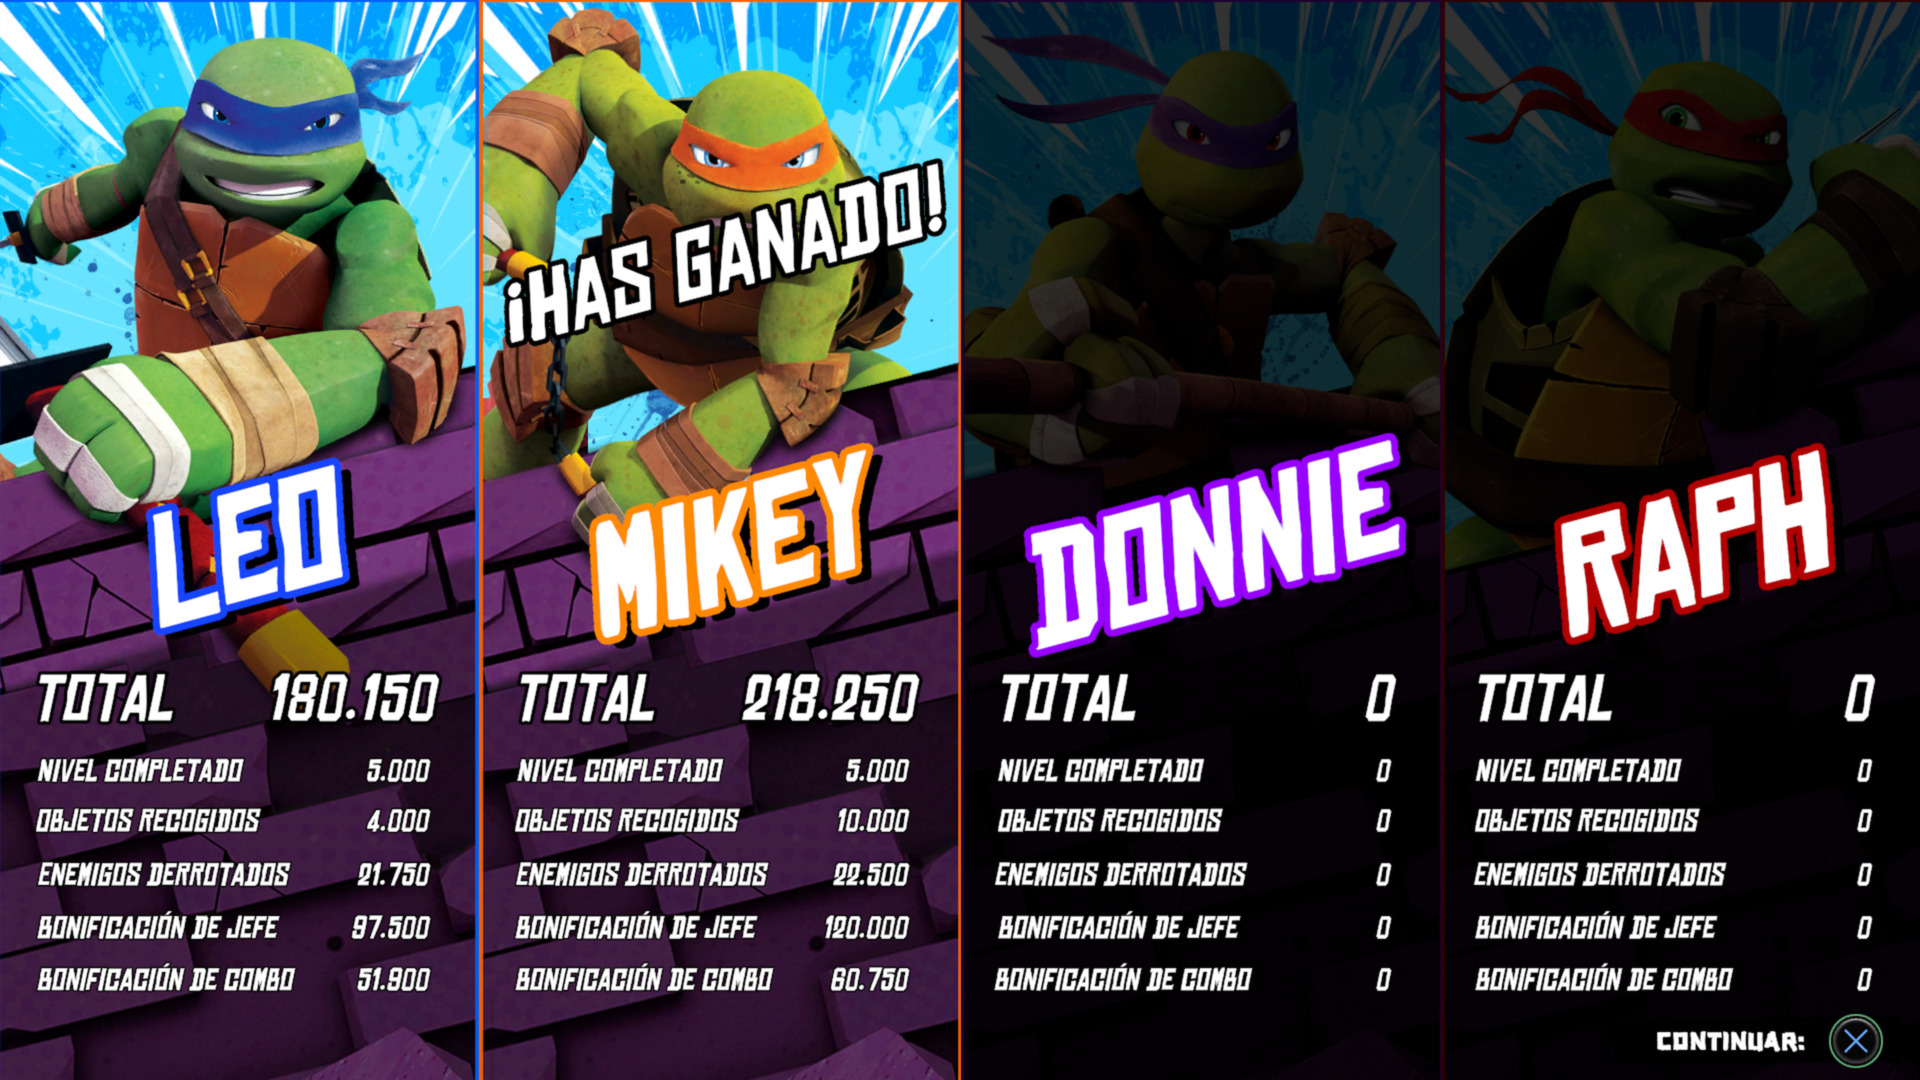 Review TMNT Arcade: Wrath of the Mutants - PC